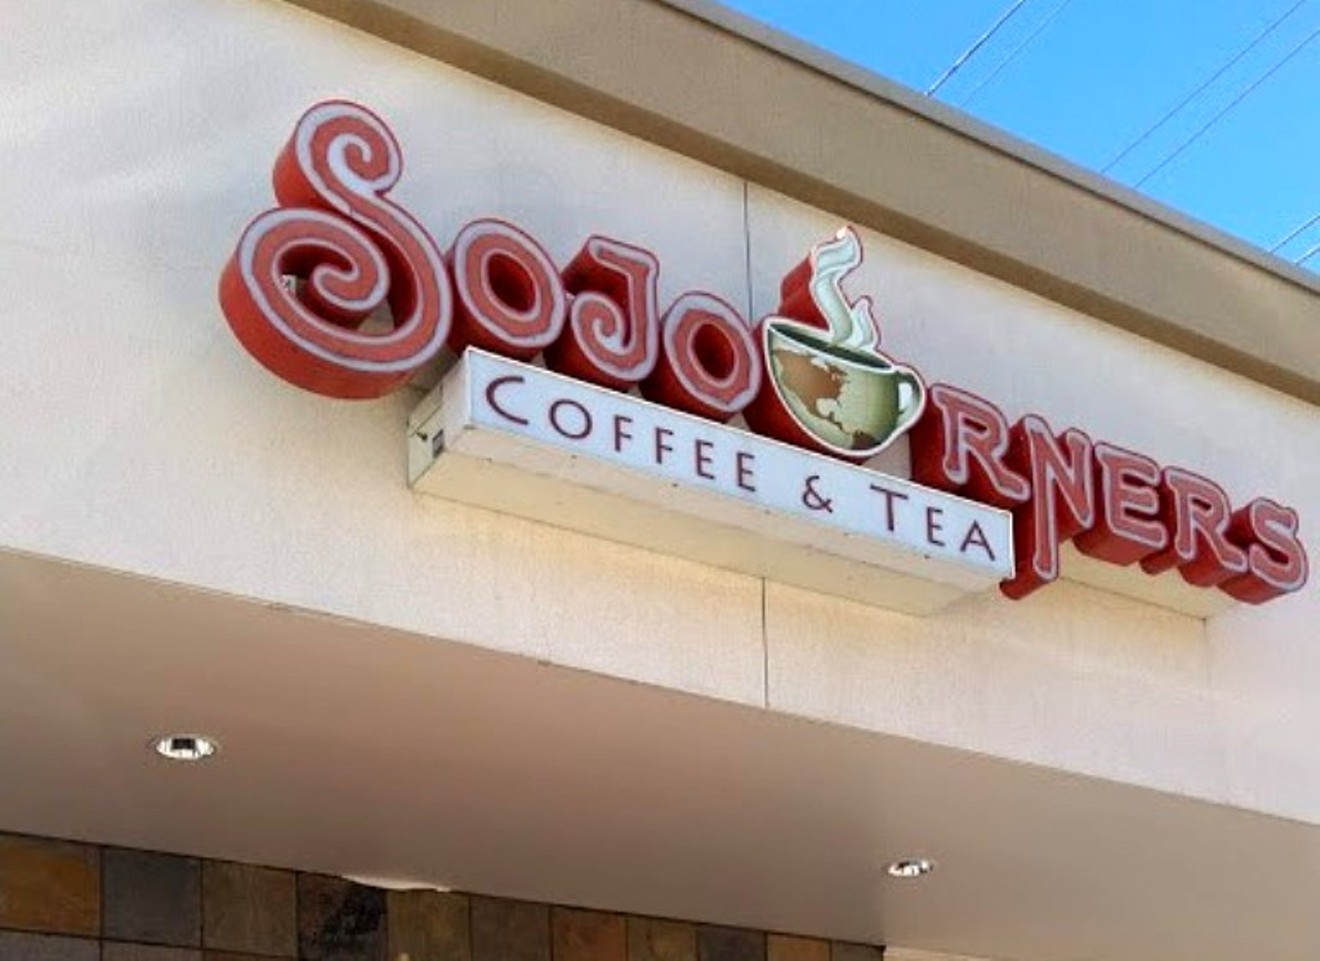 Sojourners Coffee & Tea is now closed — but there's still hope.